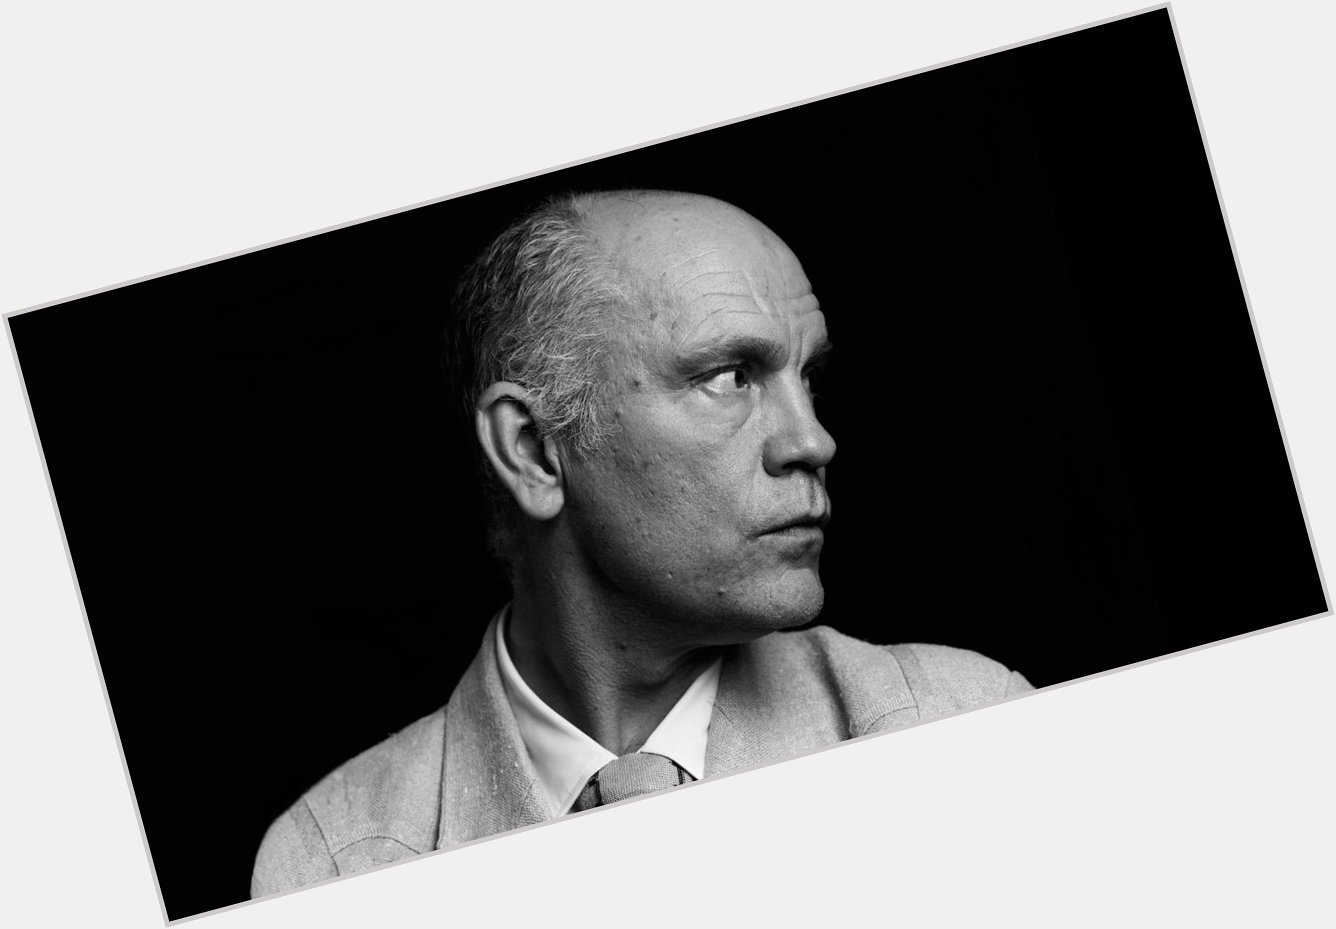 Happy birthday to a marvelous, scene-stealing actor, two-time Oscar nominee John Malkovich! 